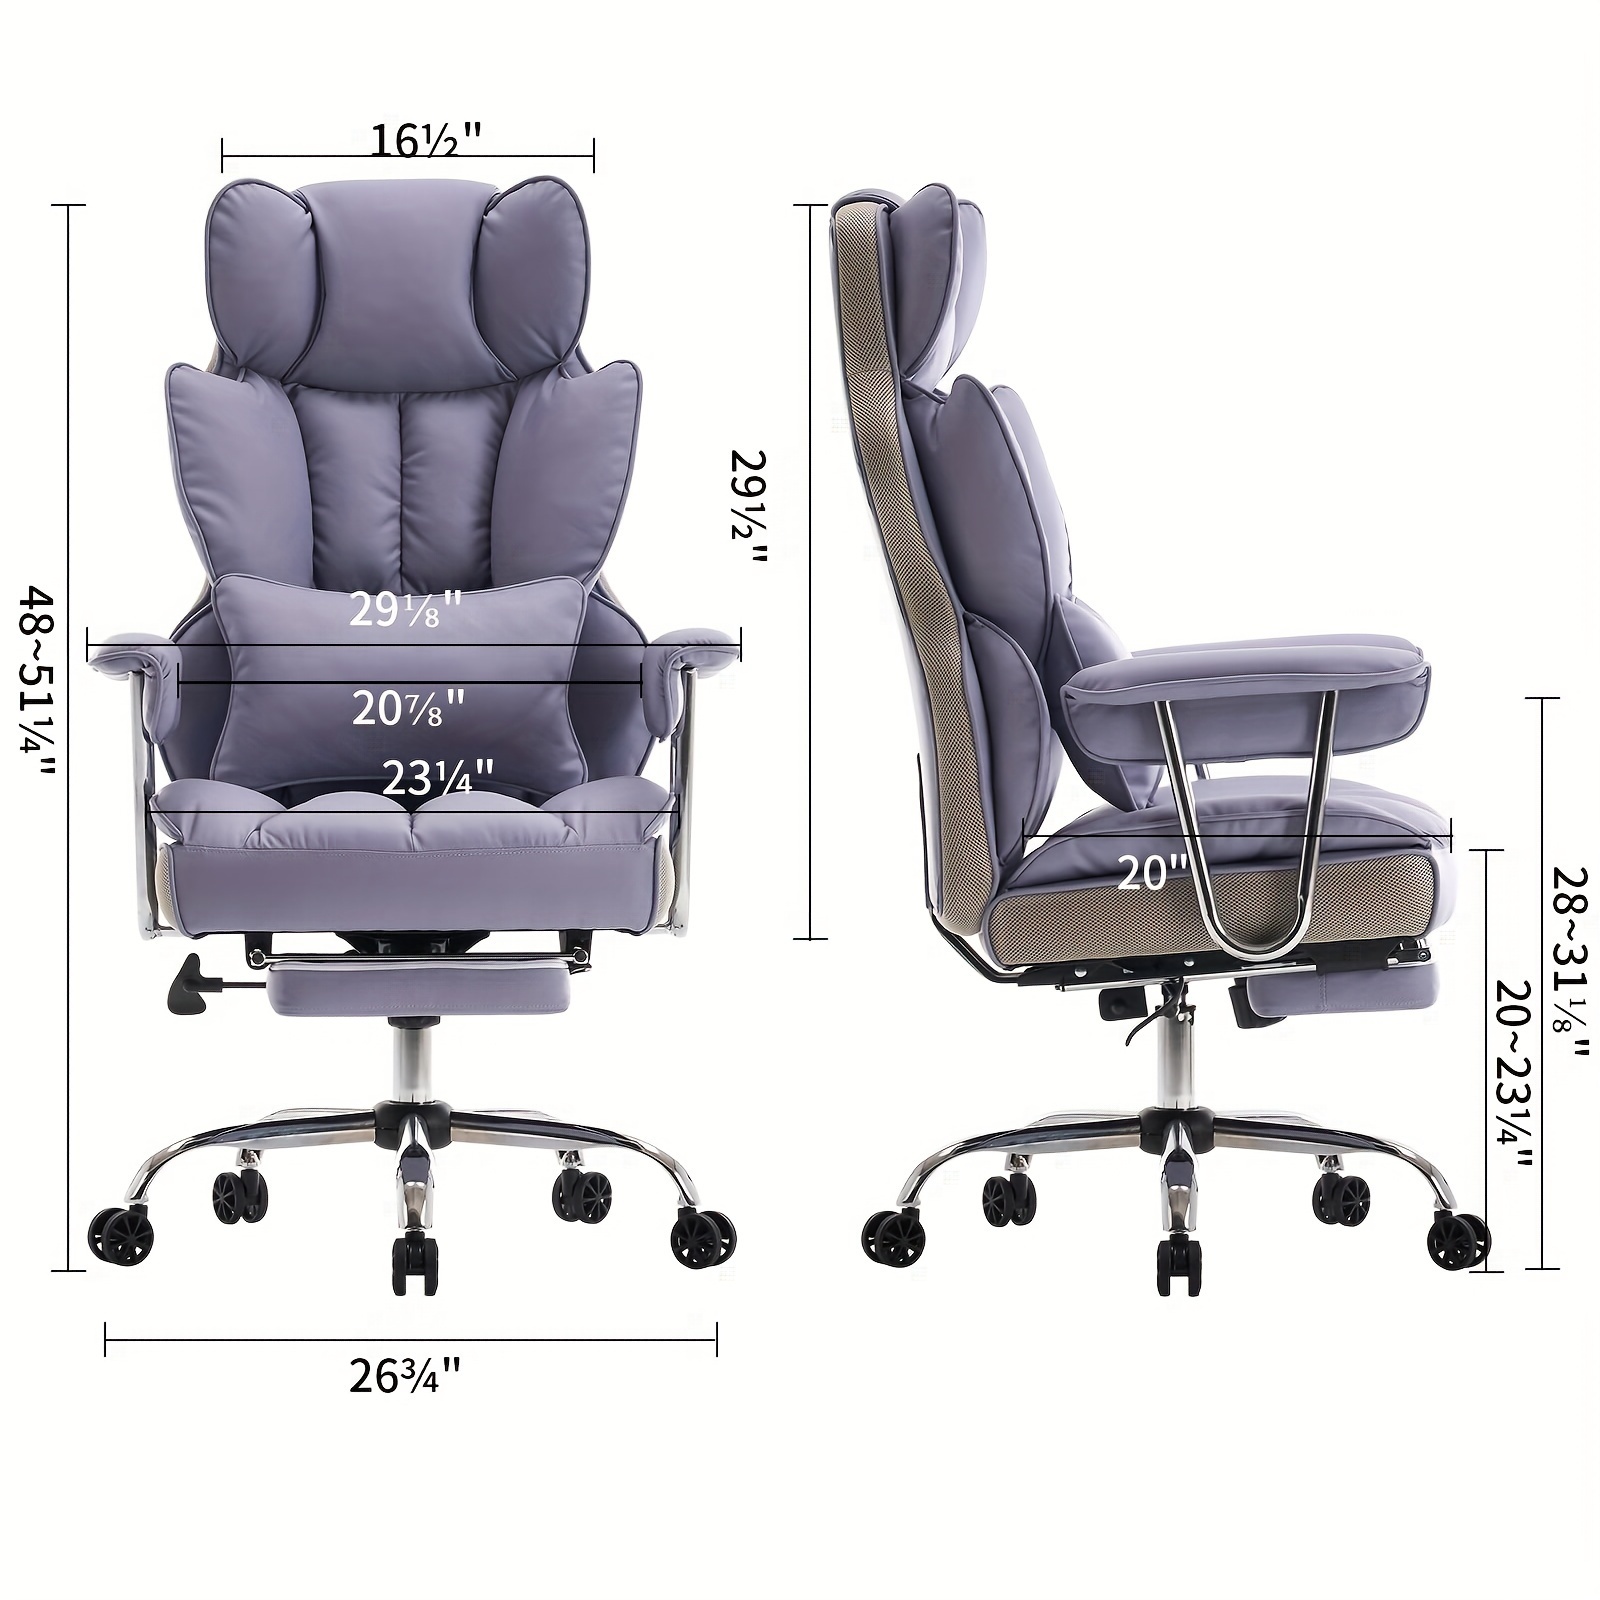 

Desk Office Chair 400lbs, Big And Tall Office Chair, Pu Leather Computer Chair, Executive Office Chair With Leg Rest And Lumbar Support